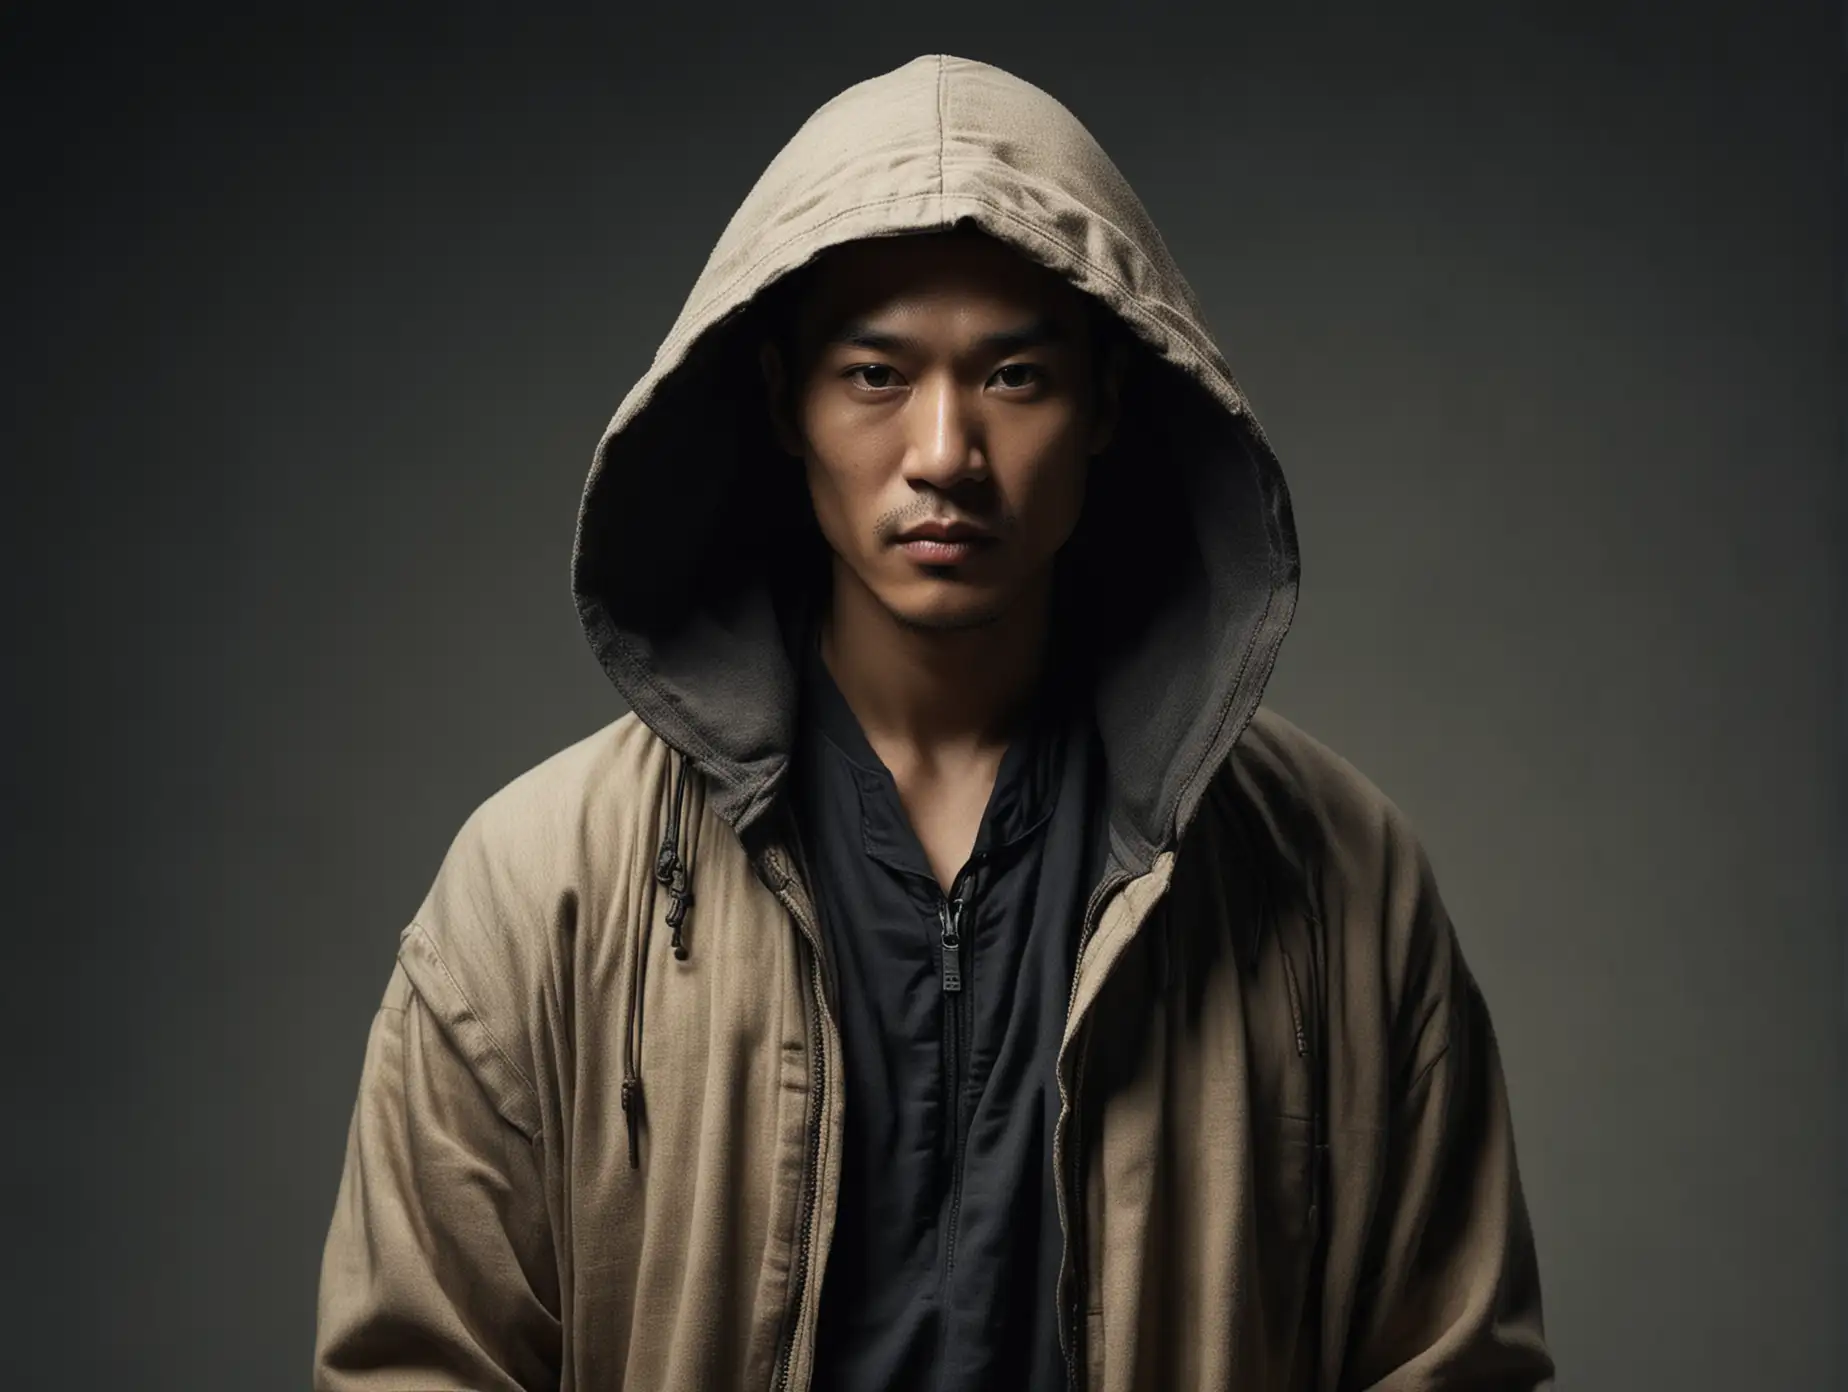 In Annie Leibovitz’s photograph, an Asian man of the main character from 'Dune' movie, he is wearing a hoodie. The scene with her signature moody Lightroom tone, utilizing a Sigma 85mm f/1.4 lens. She skillfully adjusts focal lengths, including 15mm and 35mm, to ensure the highest resolution, perfect for both 4K and 8K displays. Presented in full color, the image showcases a blend of high definition and 4K resolutions